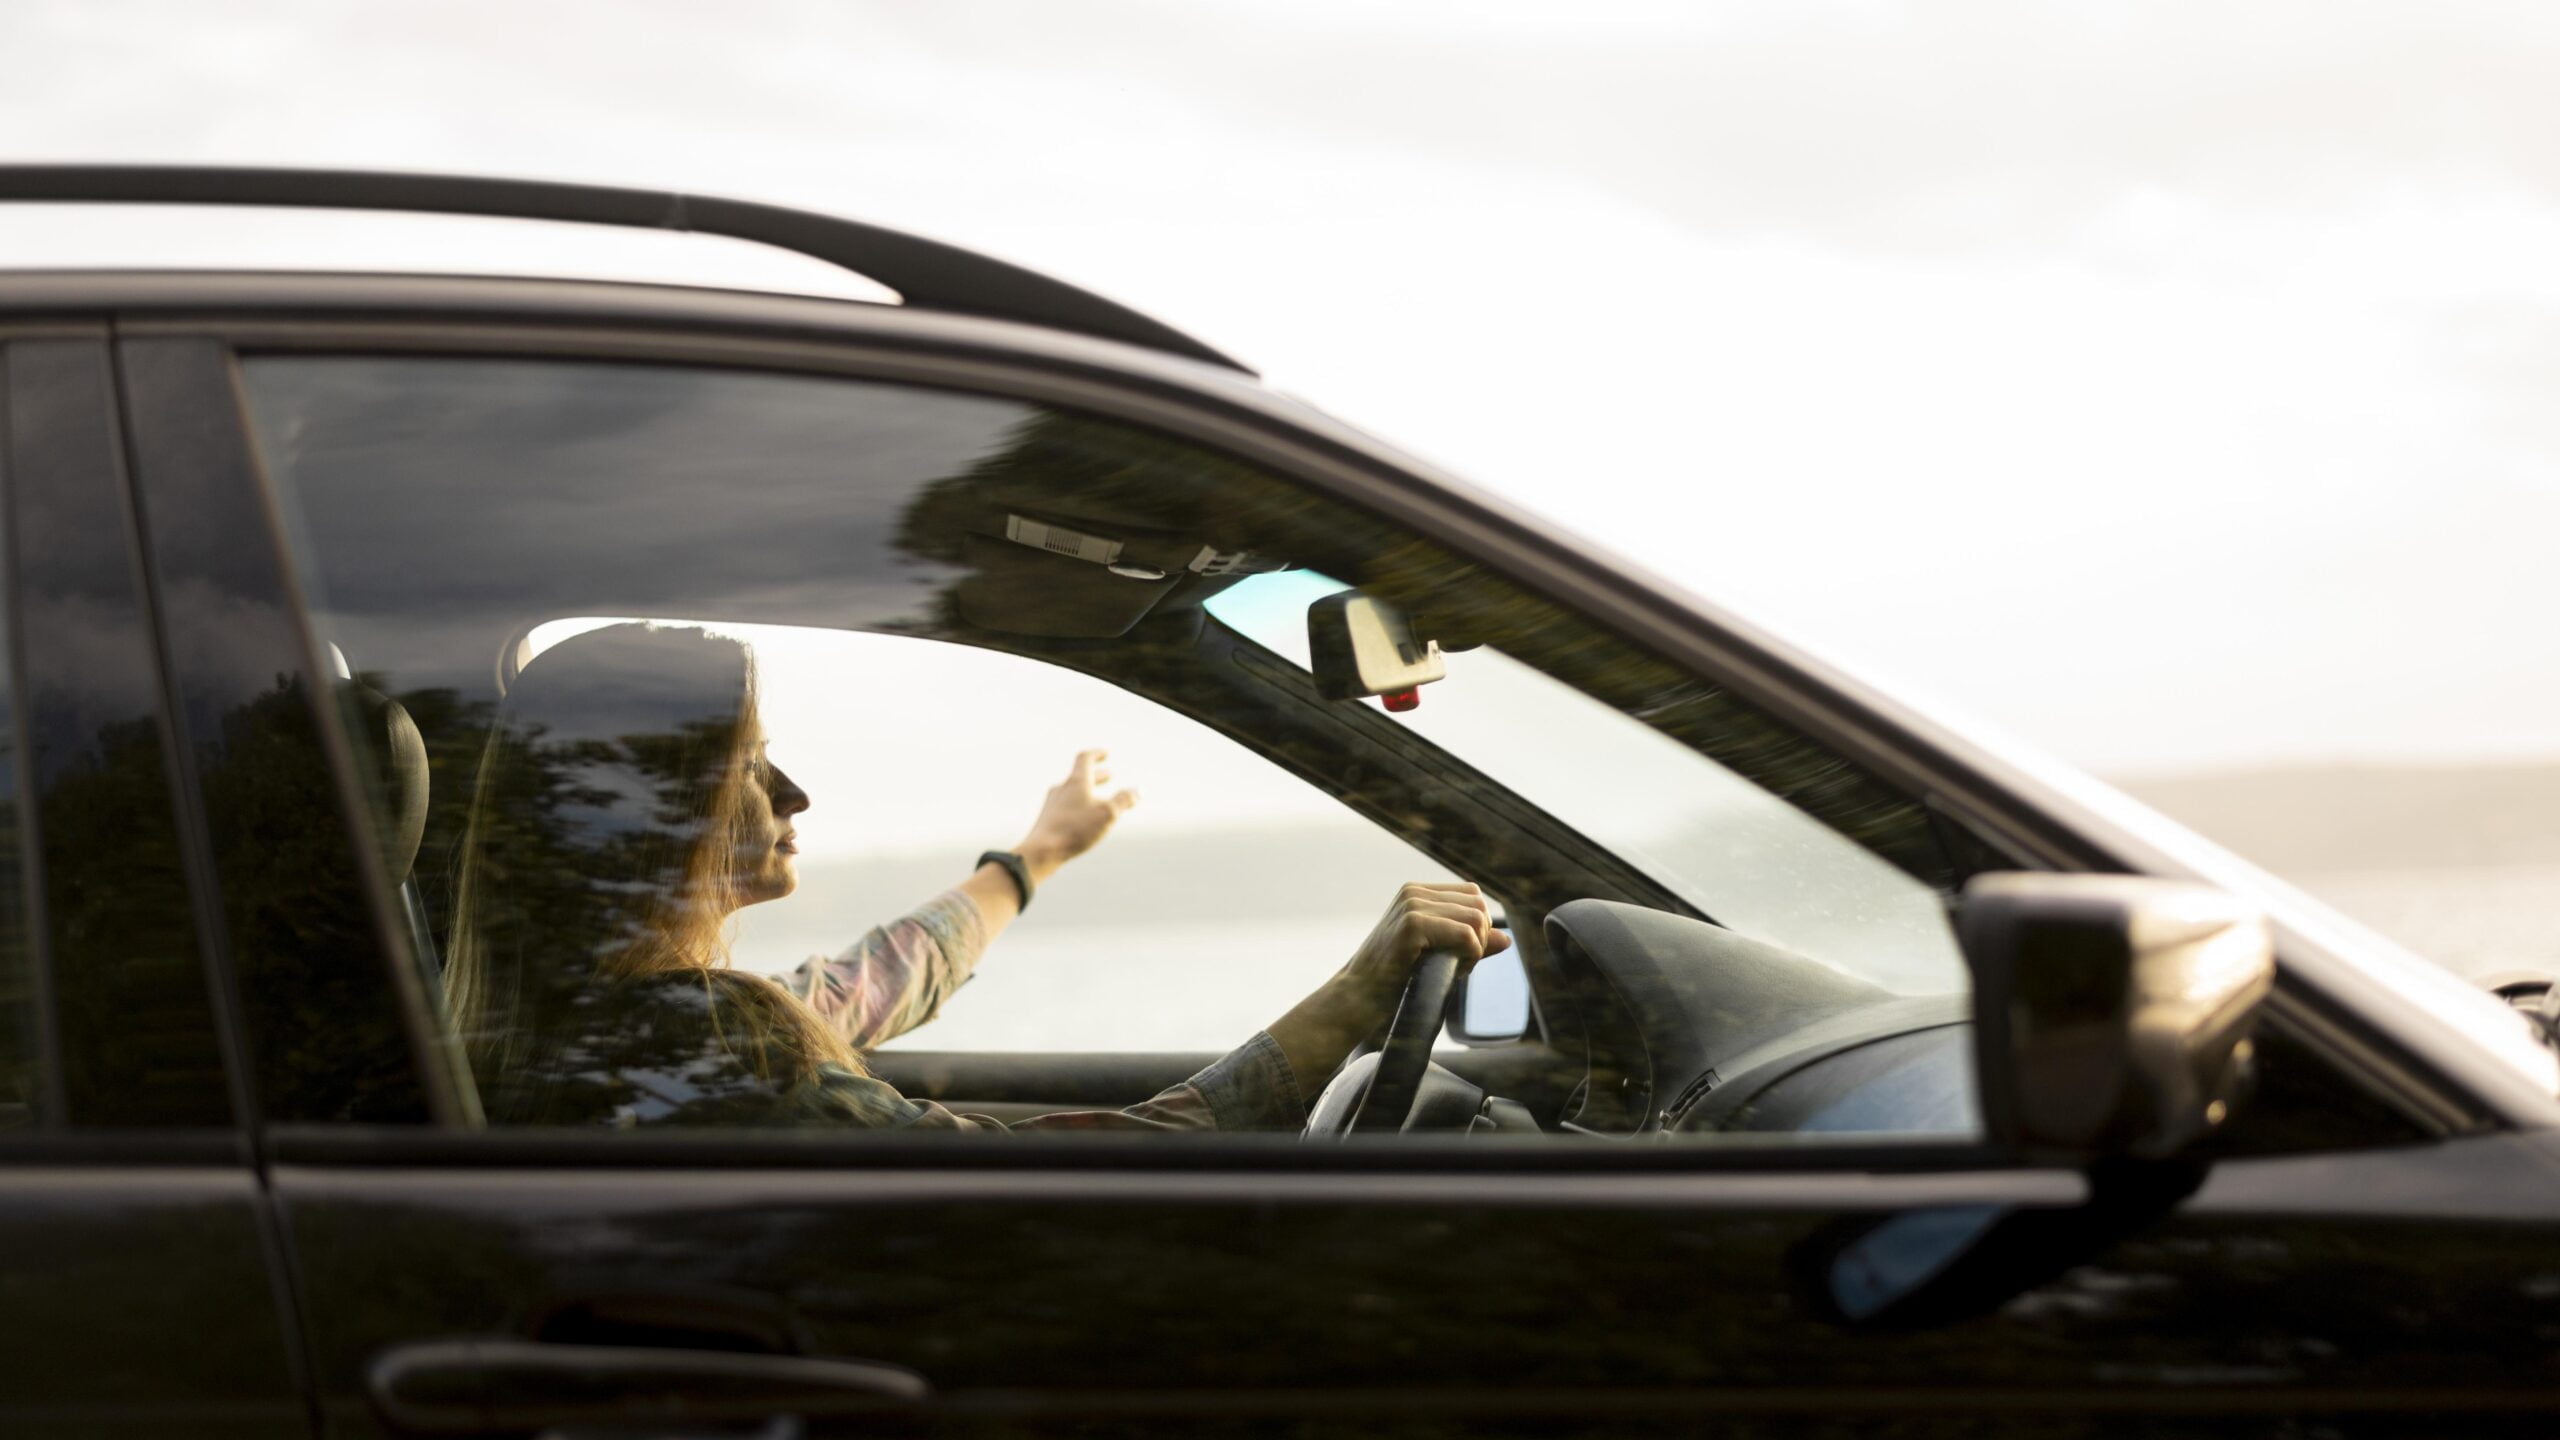 Is Your Car Window Shattered? 10 Signs You Need Auto Door Glass Replacement in Houston!